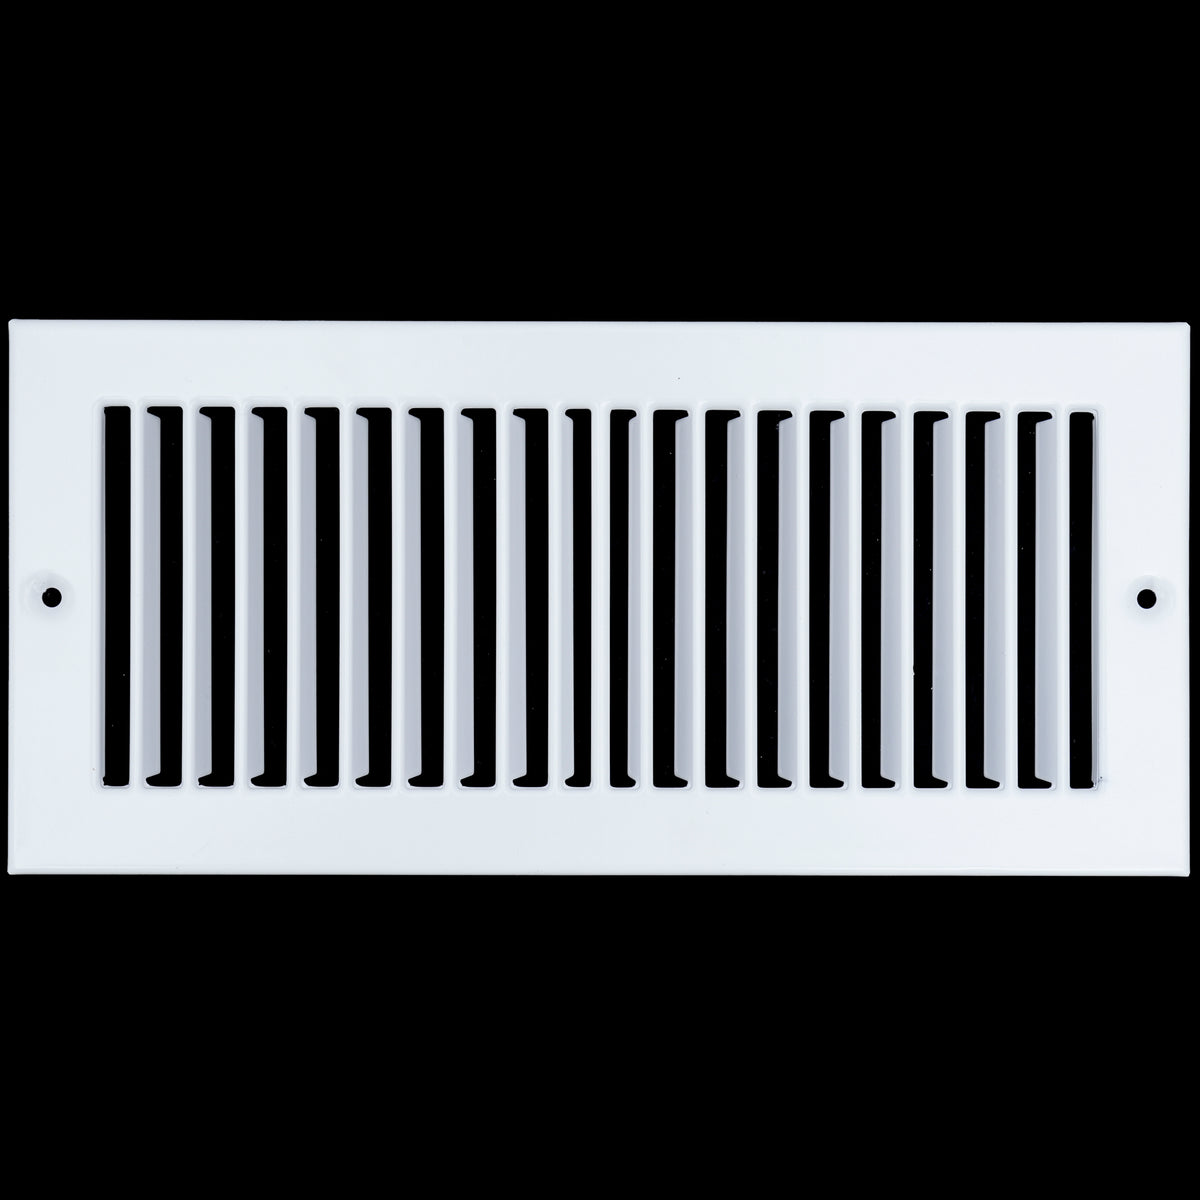 airgrilles 4" x 10" toe kick register grille vent cover outer dimensions: 5.5" x 11.5" white hnd-tgs-wh-4x10  1